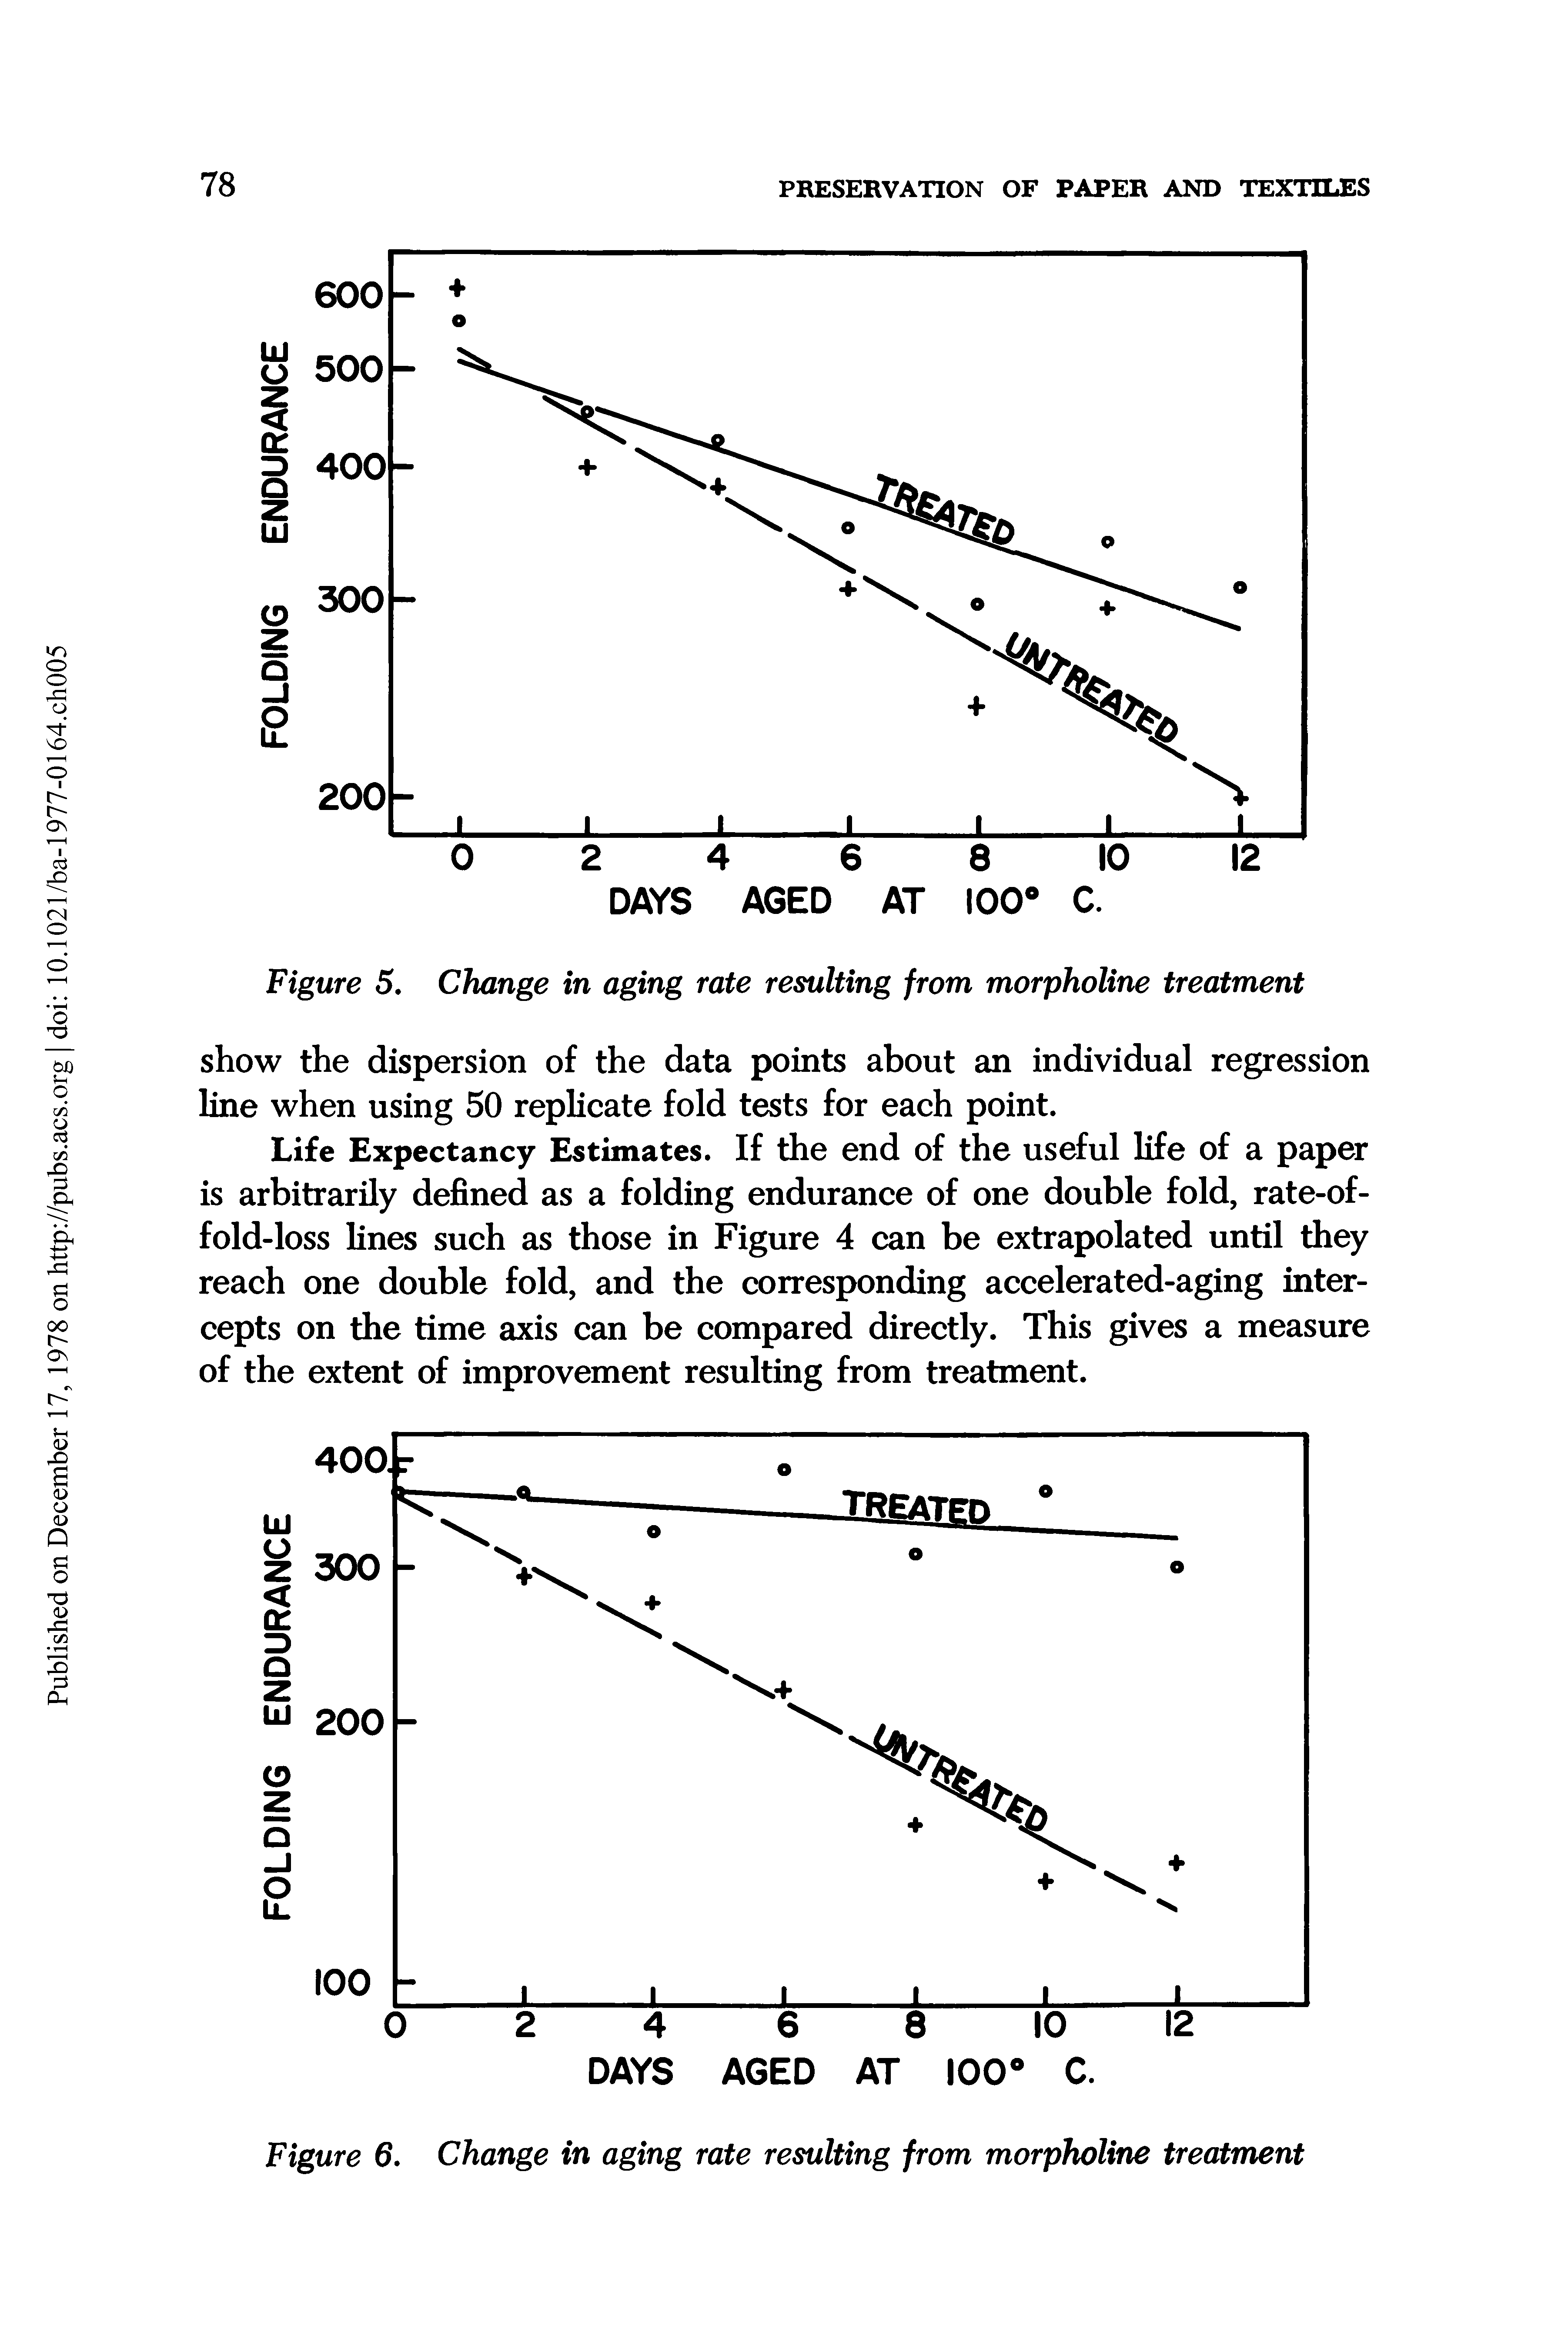 Figure 5. Change in aging rate resulting from morpholine treatment...